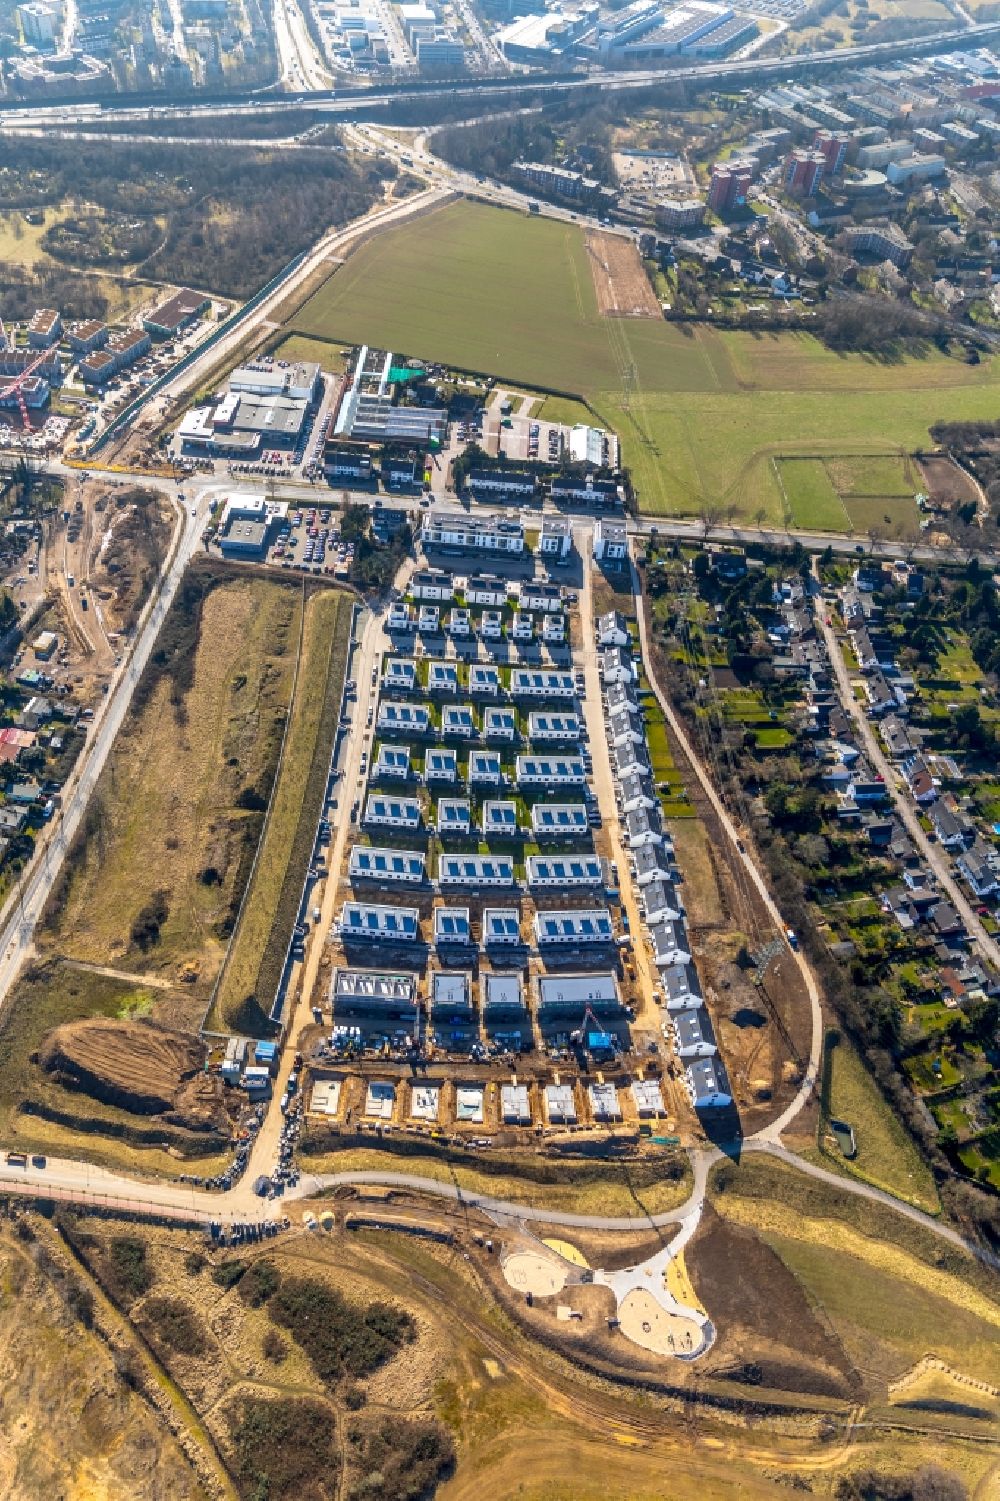 Meerbusch from the bird's eye view: Construction site of a new residential area of the terraced housing estate Unter of Muehle - Ruth-Niehaus-Strasse in Meerbusch in the state North Rhine-Westphalia, Germany